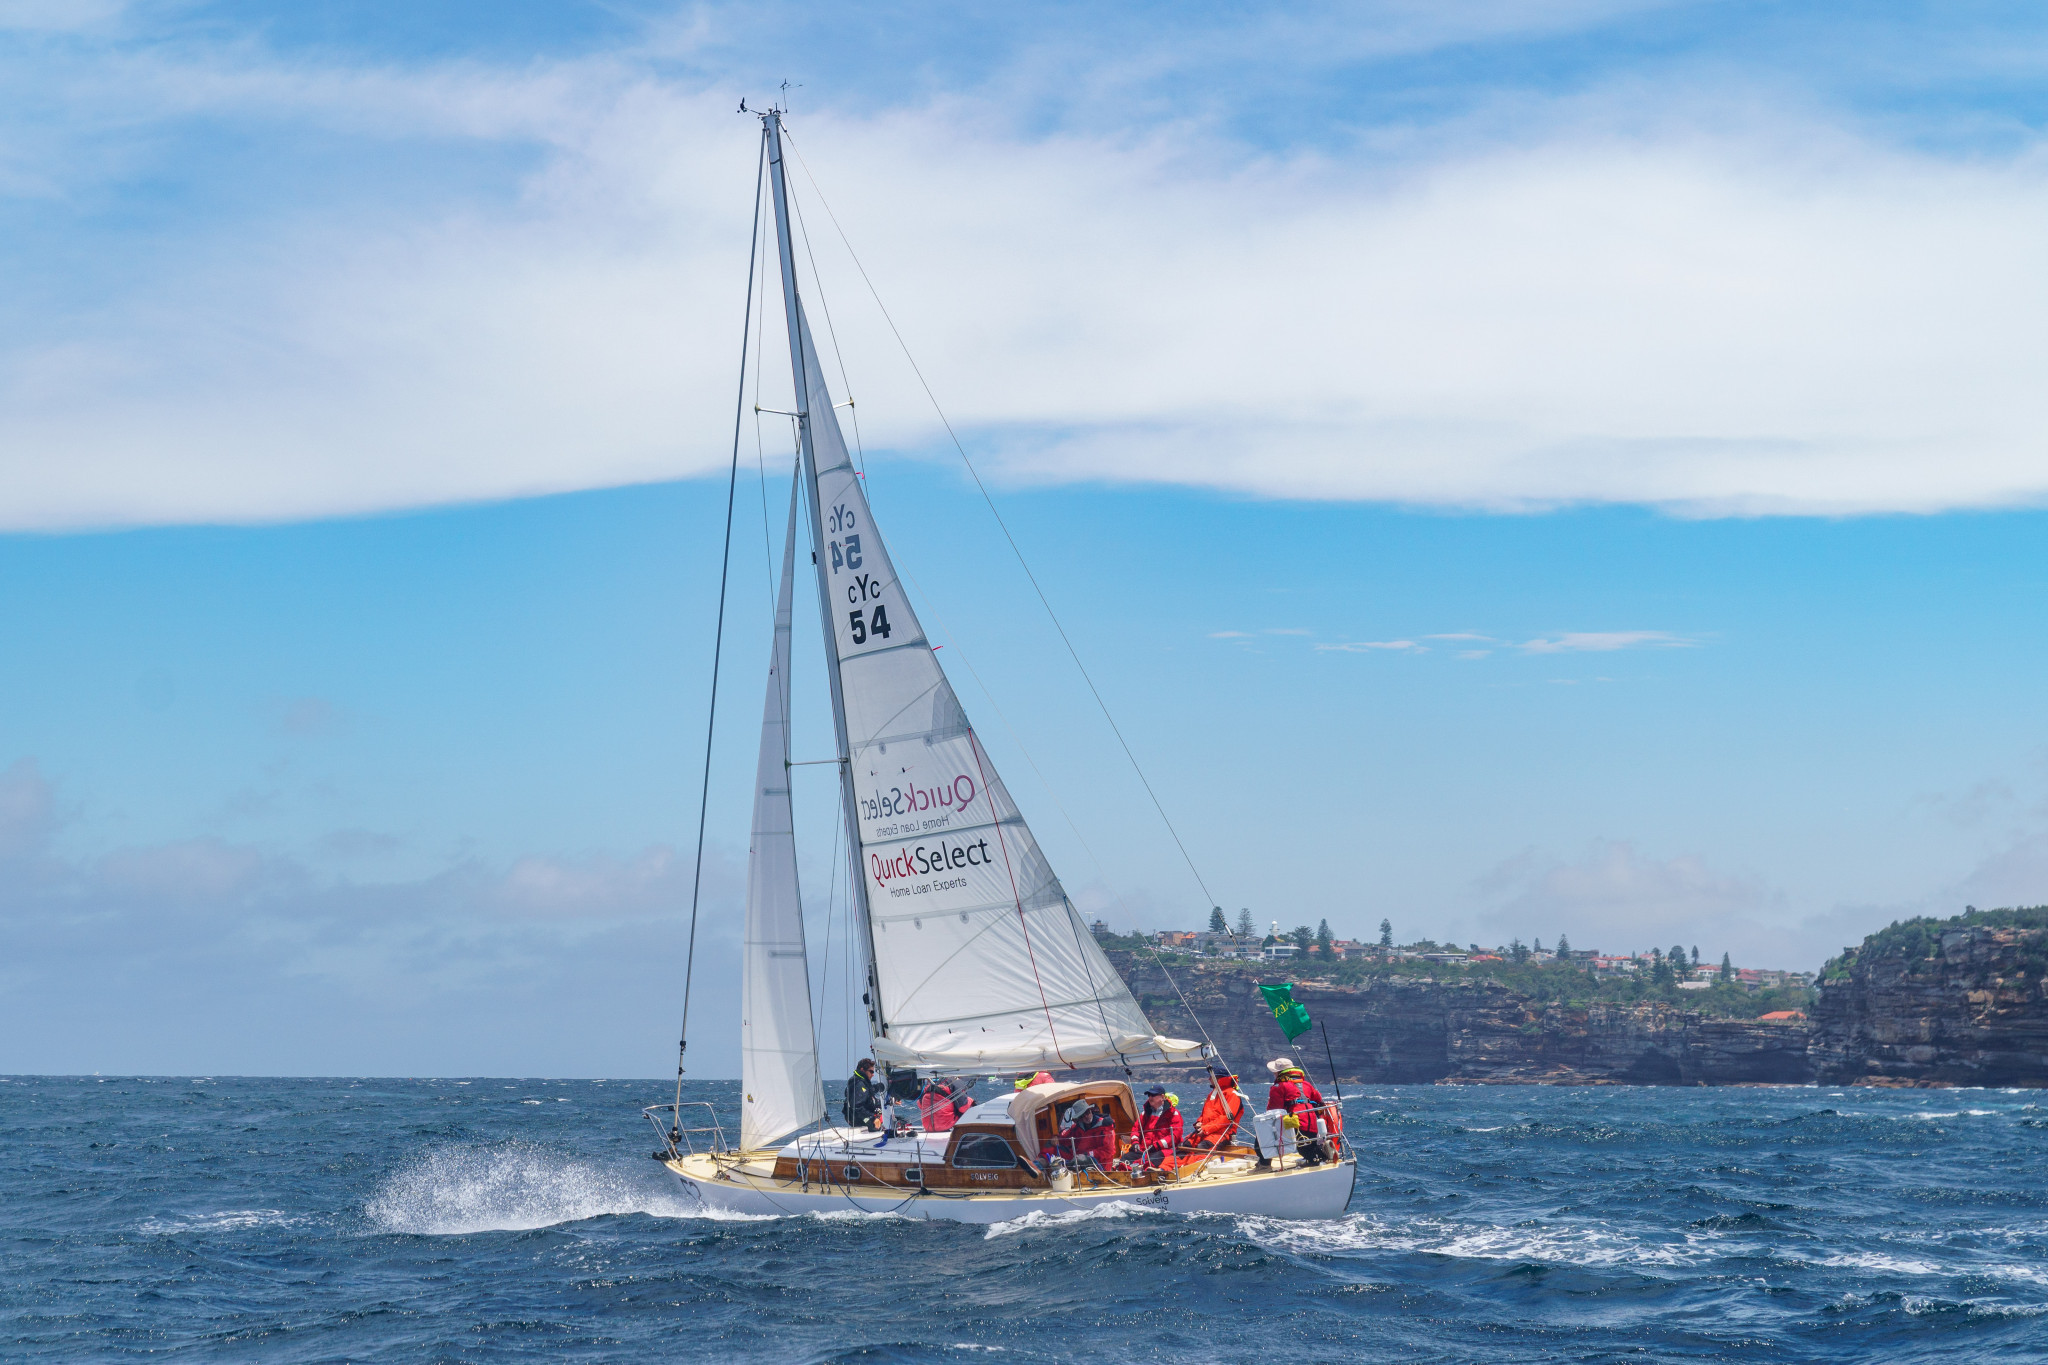 Australian Sailing launches Sailing 2032 strategic plan with end goal of Olympic medals